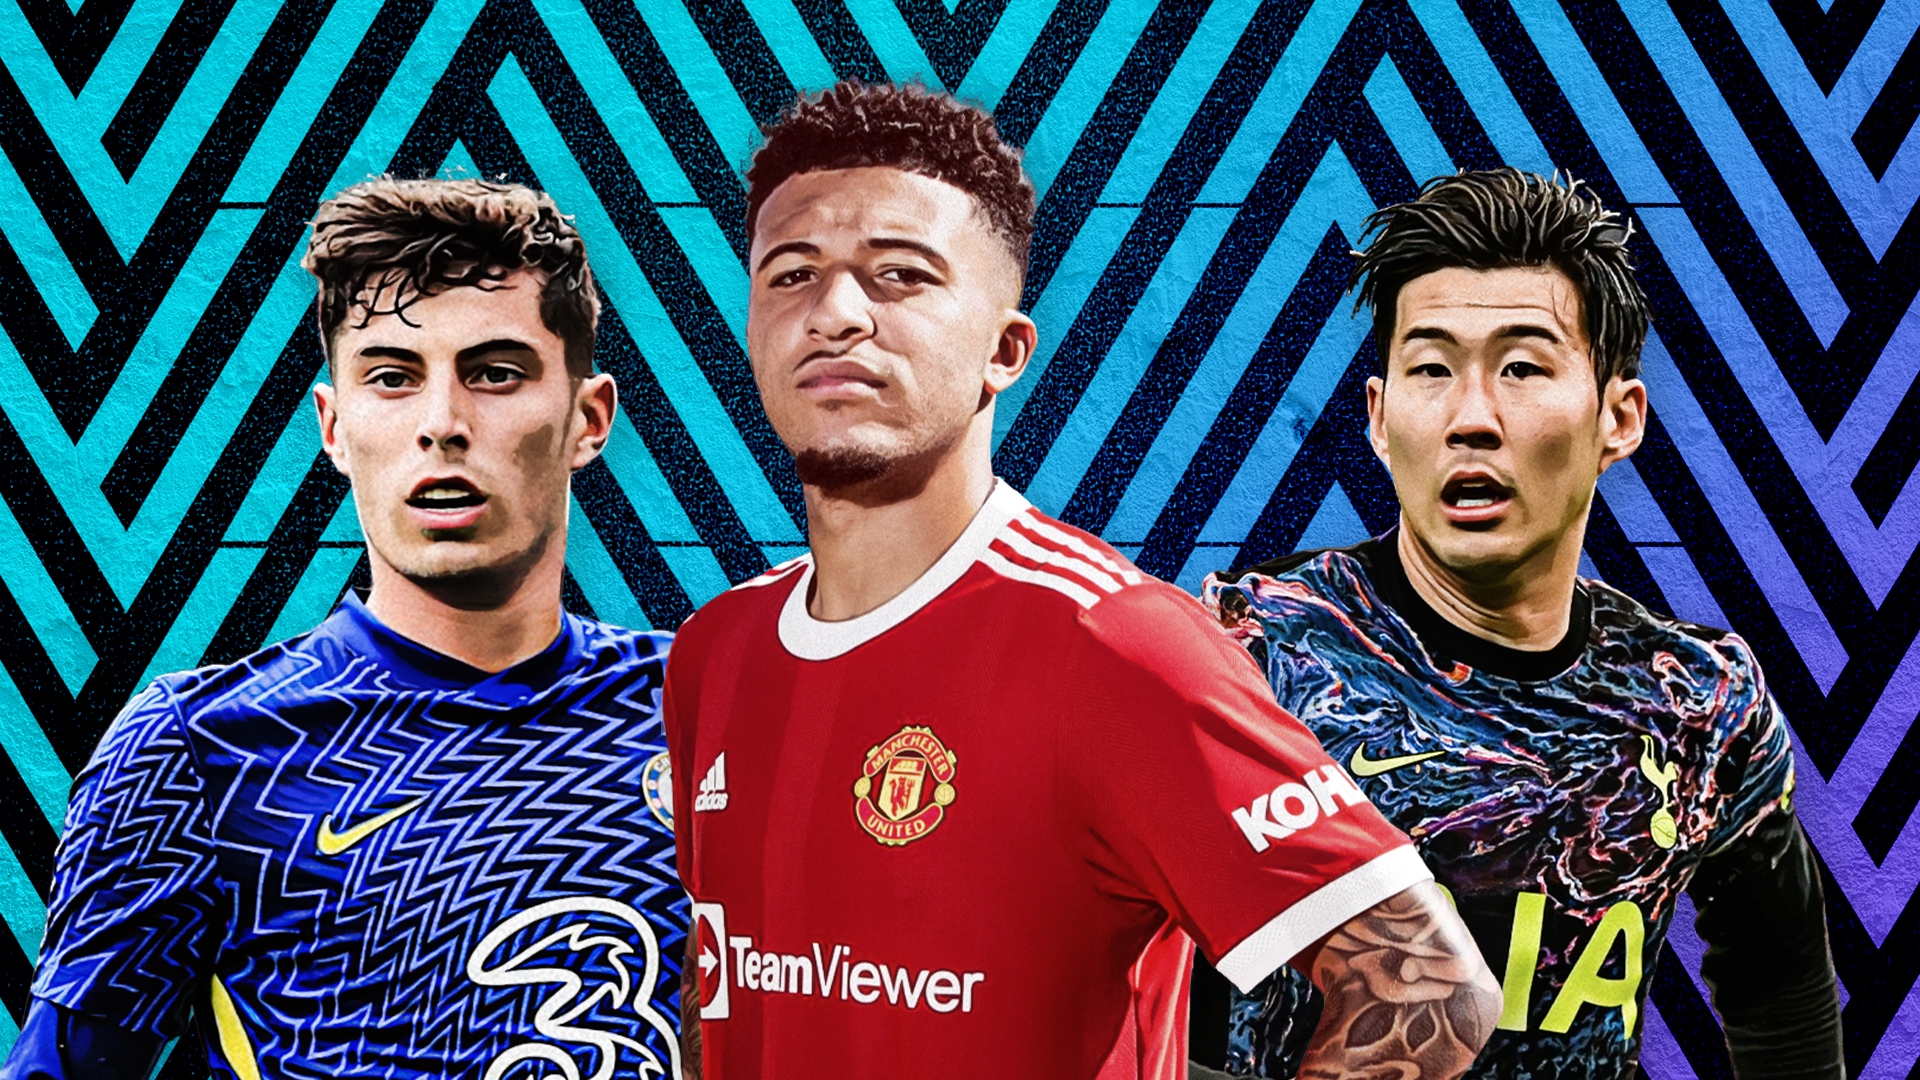 Fantasy Football: Premier League 2021 22 Tips, Best Players, Rules, Prizes & Guide To FPL Game. Goal.com US